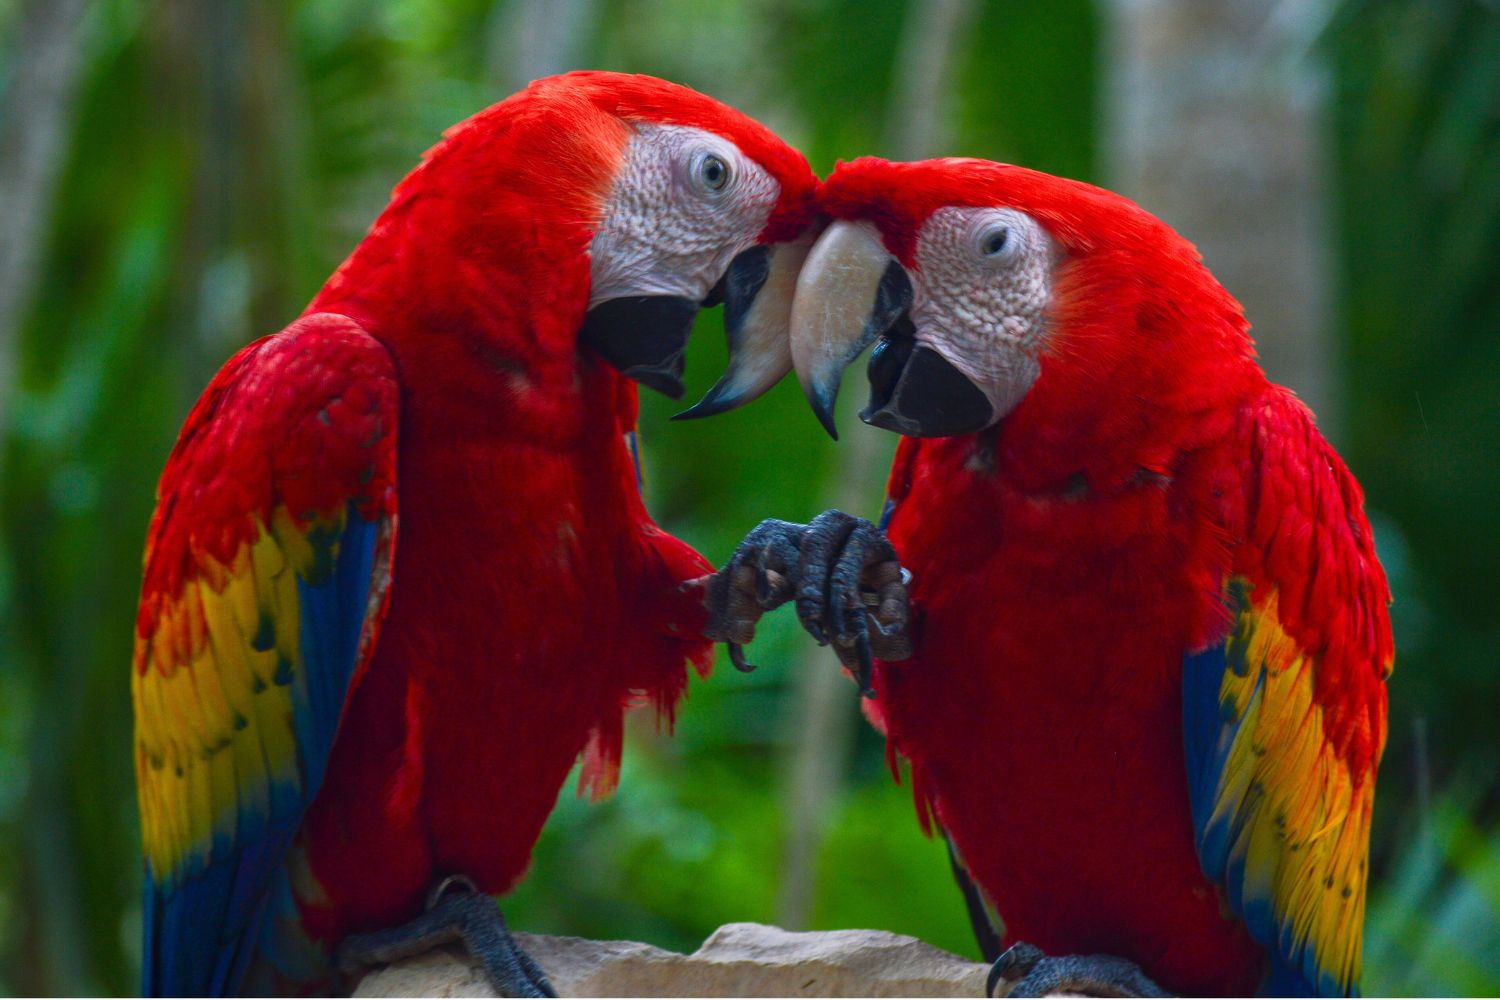 5. Macaws typically mate for life